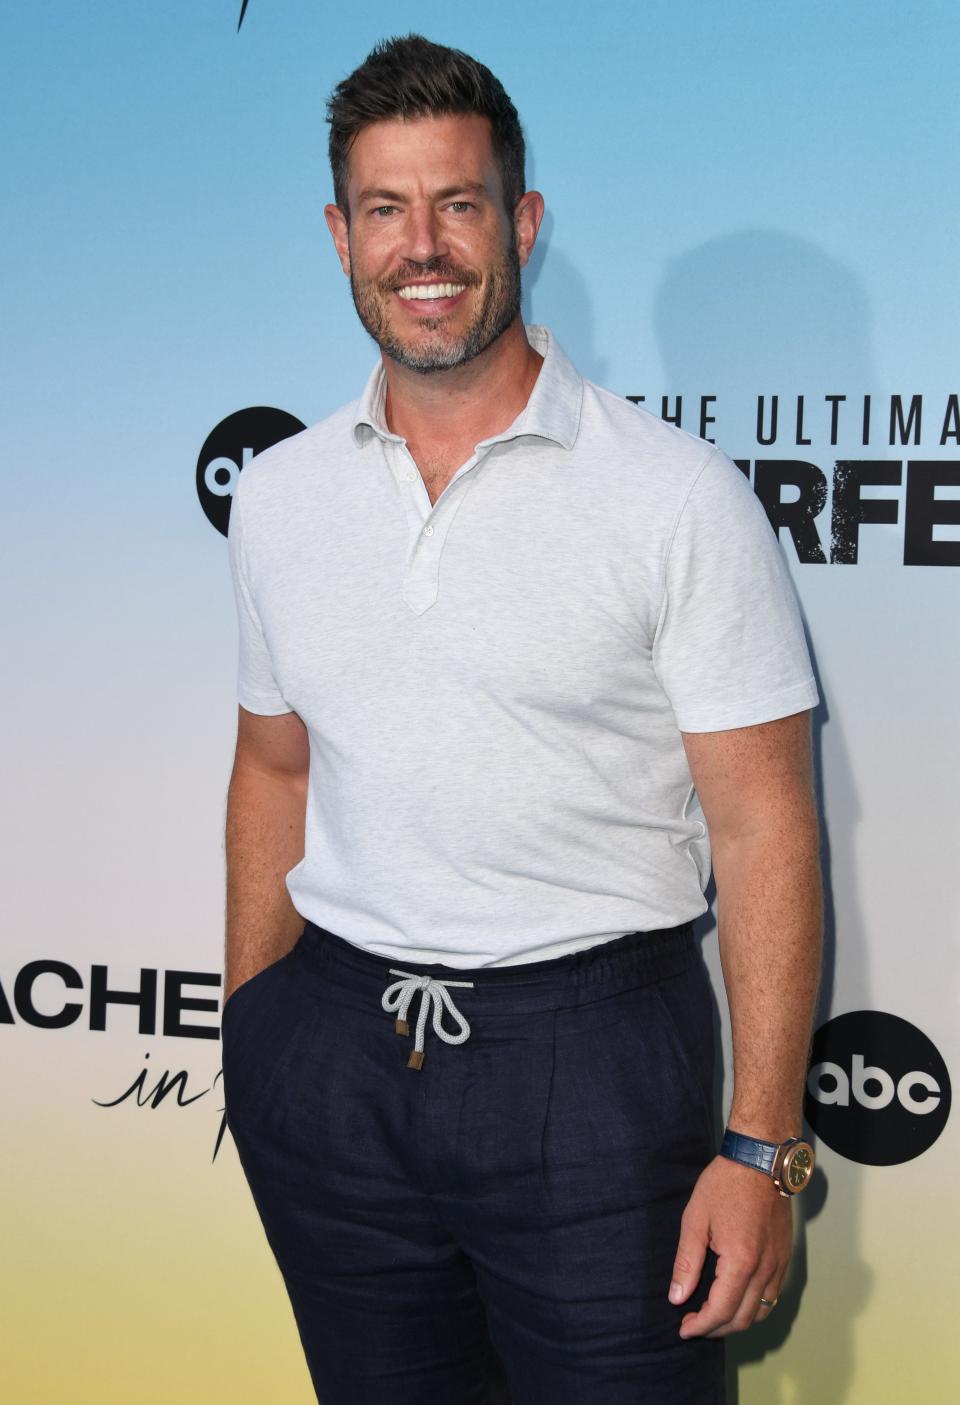 SANTA MONICA, CALIFORNIA - AUGUST 12: Jesse Palmer attends ABC's "Bachelor In Paradise" And "The Ultimate Surfer" Premiere at Fairmont Miramar - Hotel & Bungalows on August 12, 2021 in Santa Monica, California. (Photo by Jon Kopaloff/Getty Images)